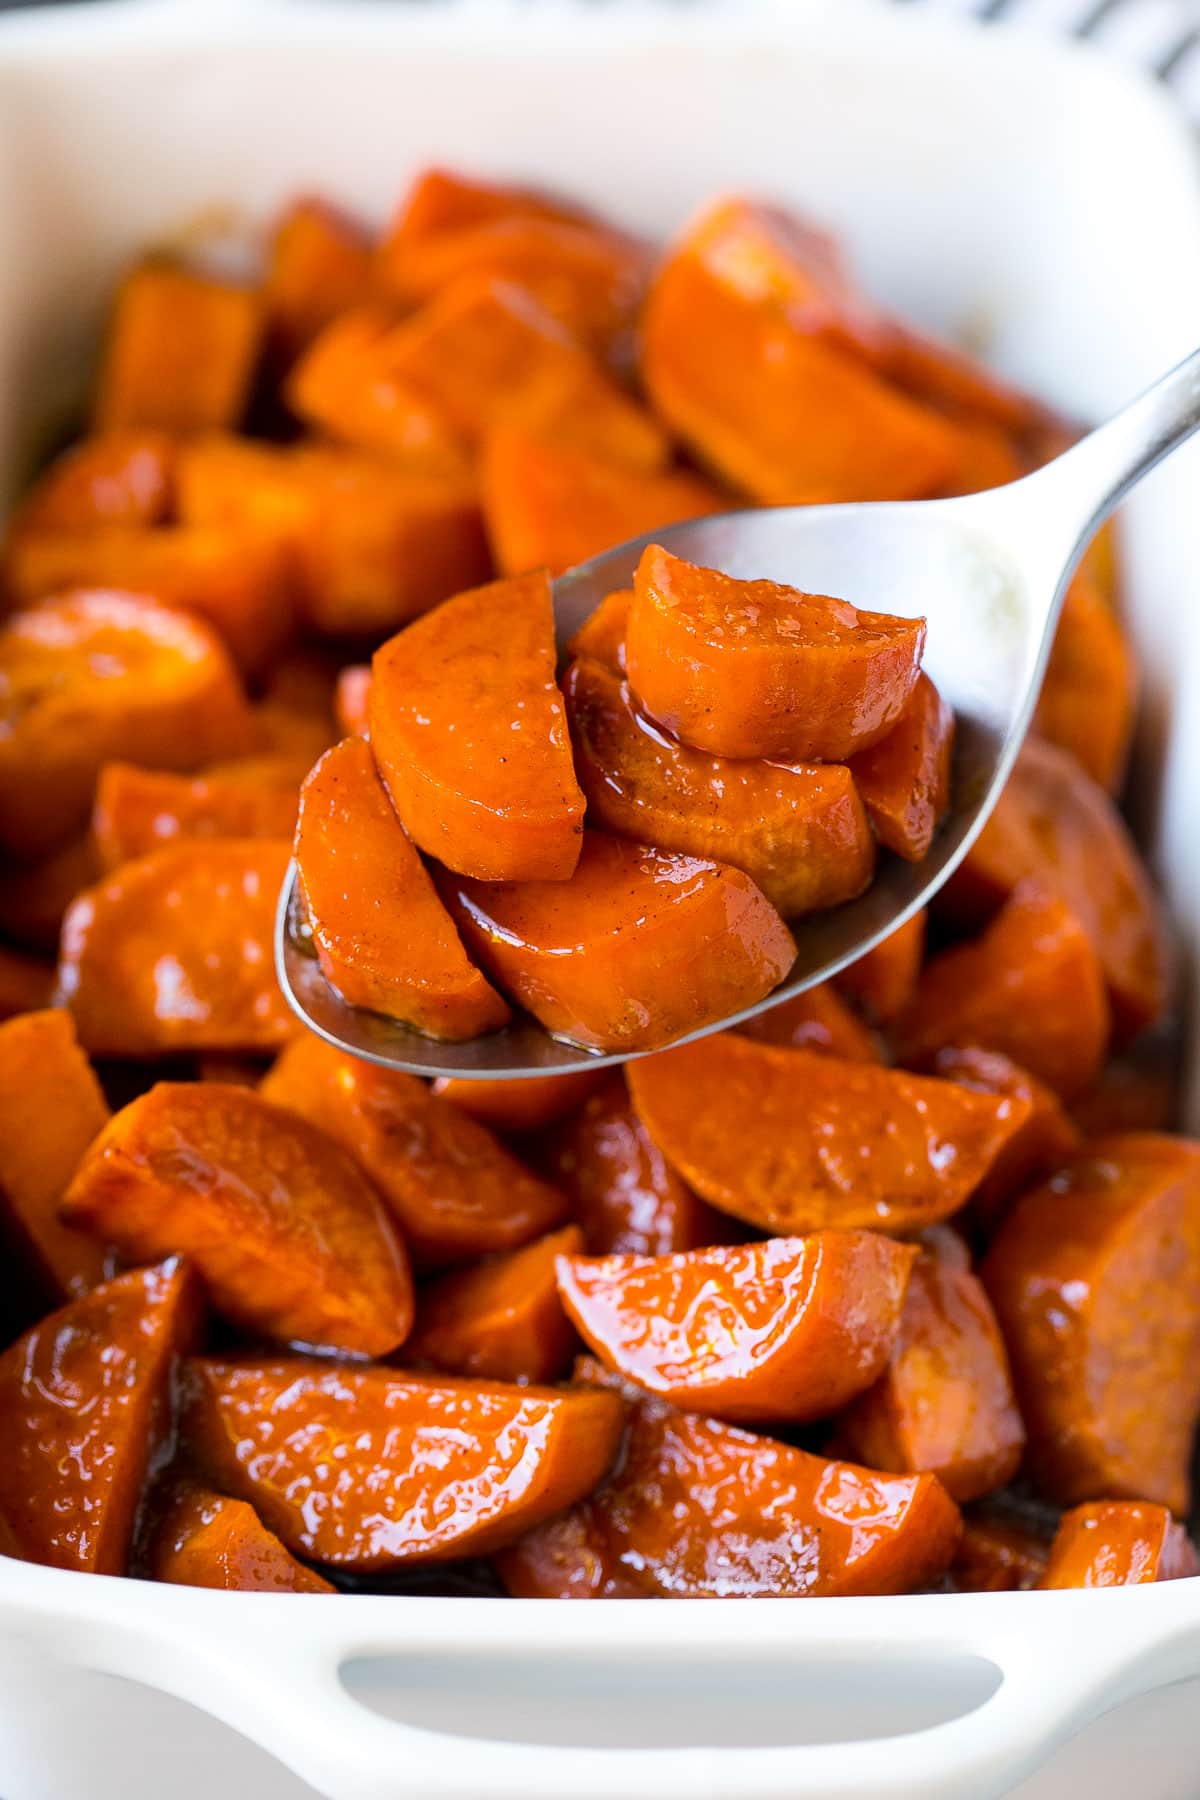 A spoon serving up a portion of candied sweet potatoes.